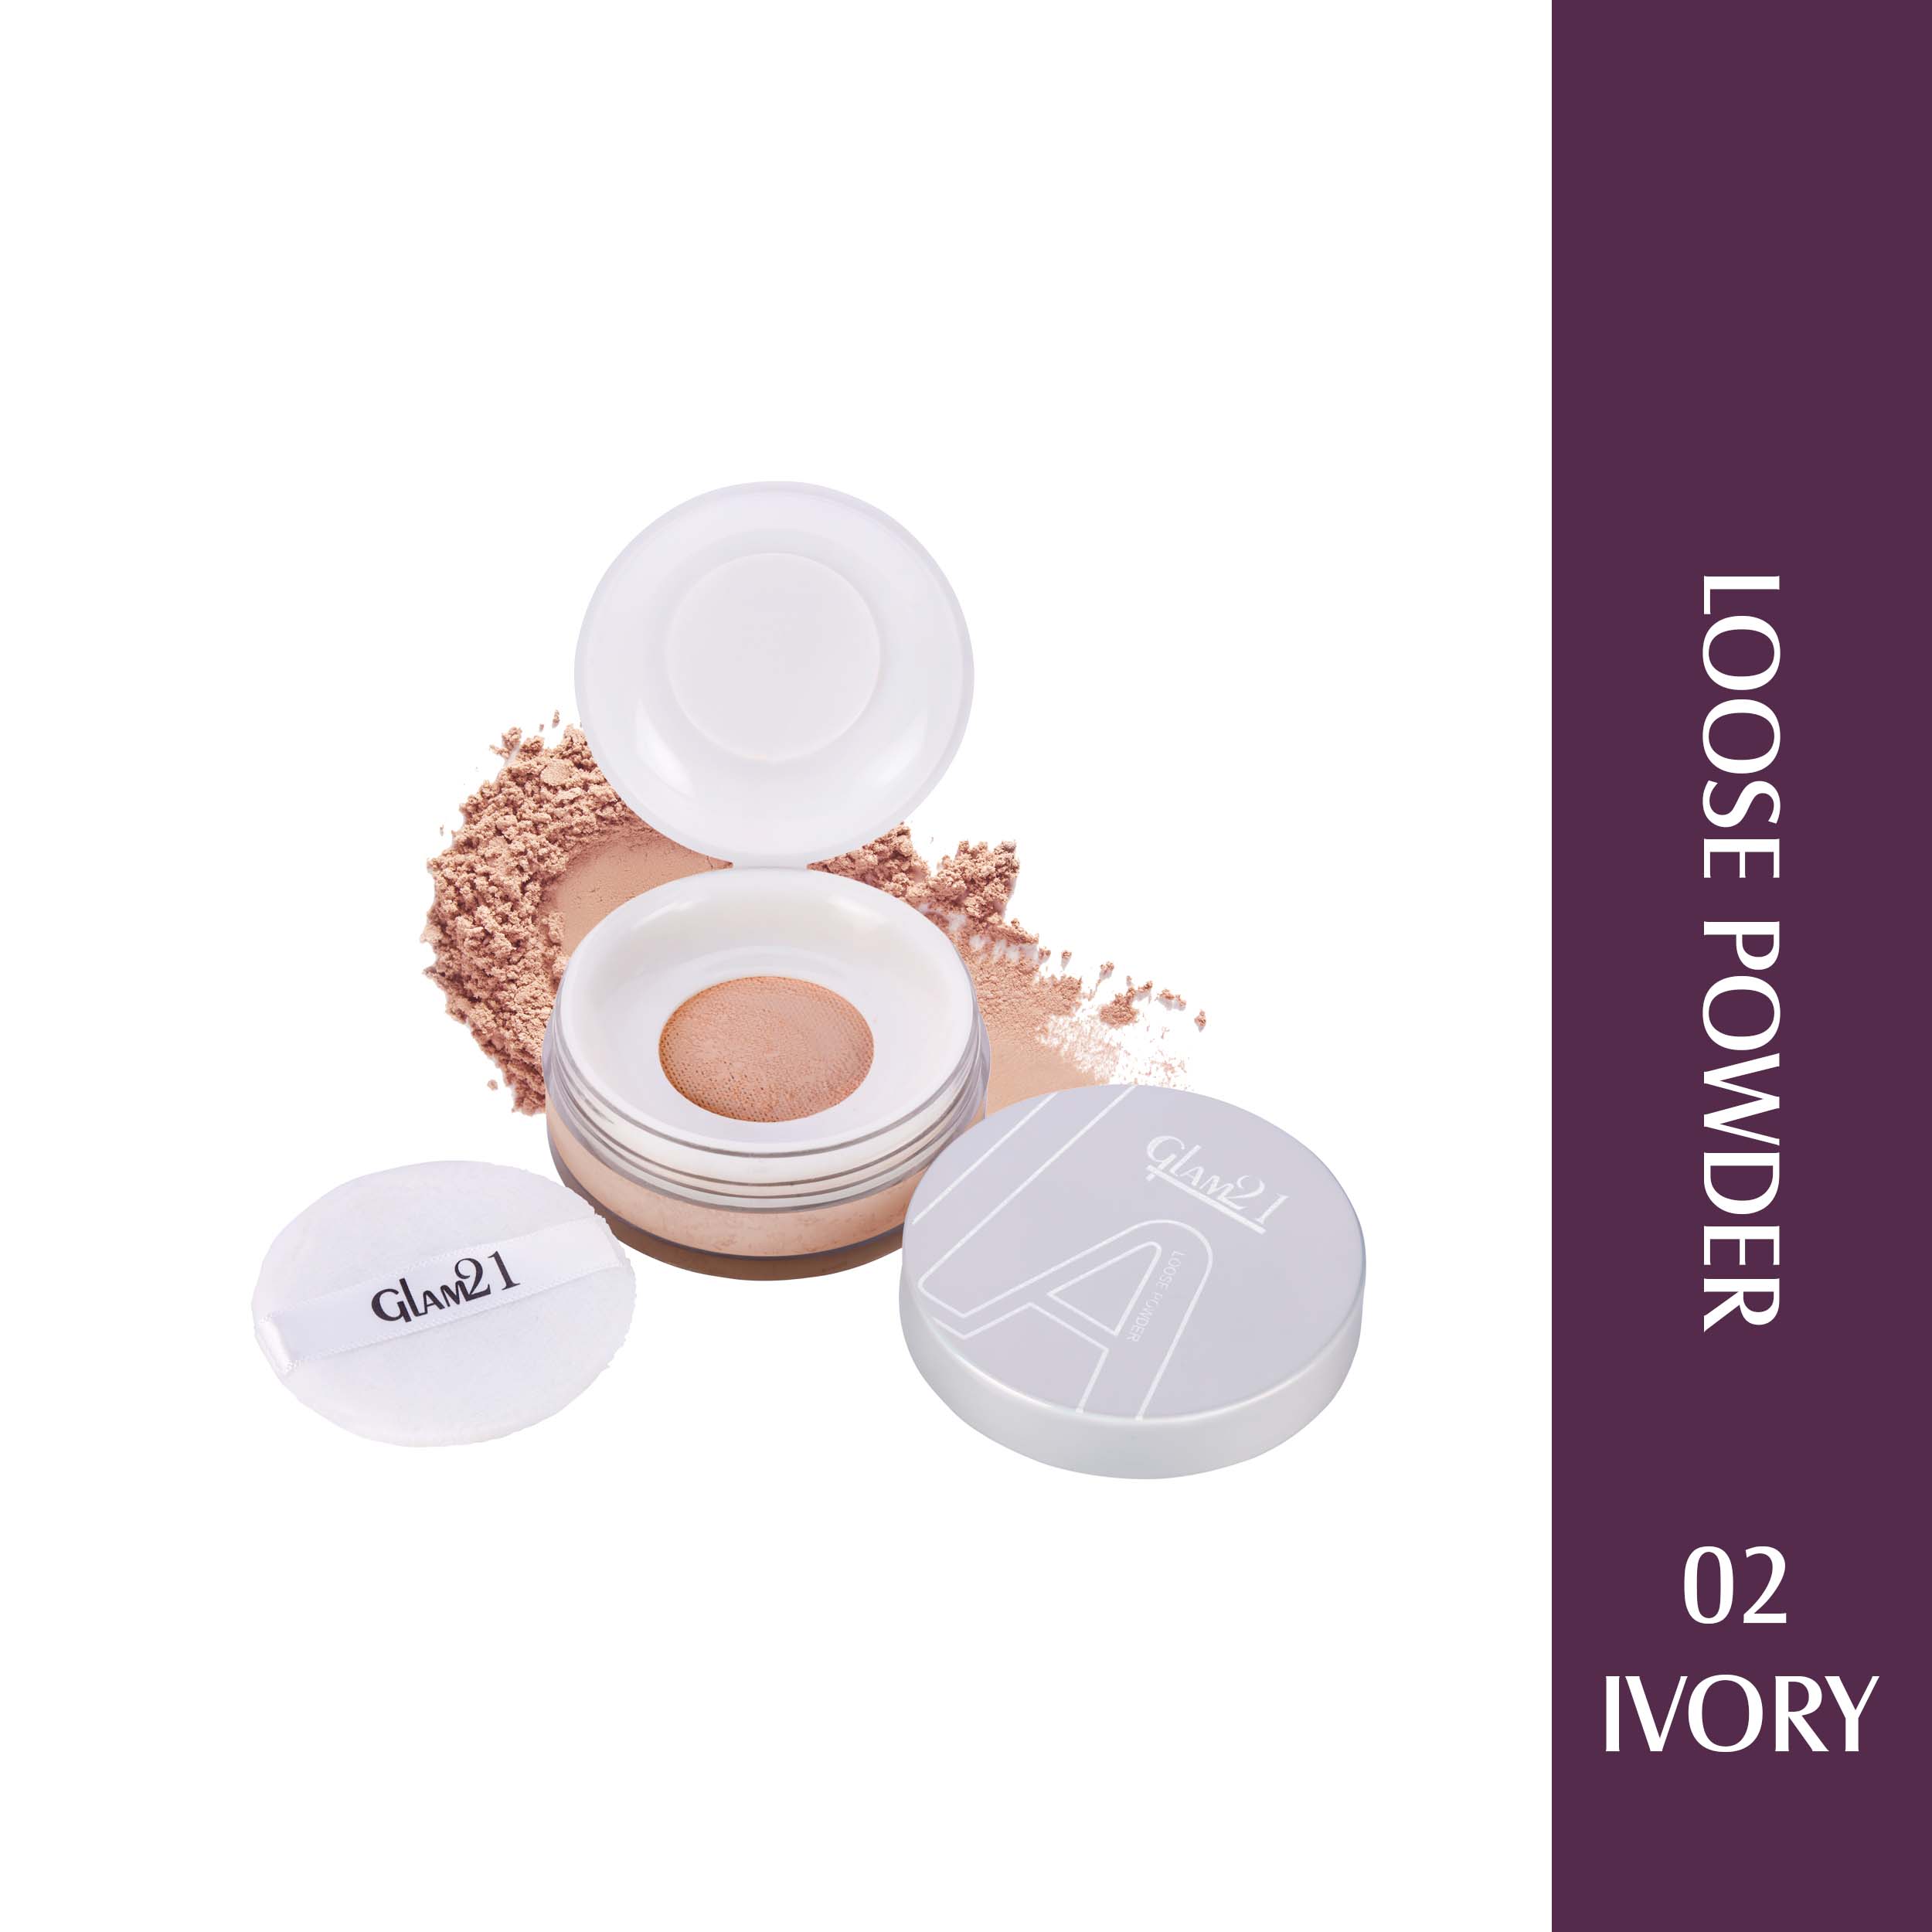 Glam21 Loose Face Powder Compact, 8 g Absorb Excess Oil & Sweat | Give the Best Sheer Finish Compact, 8 g (Ivory)